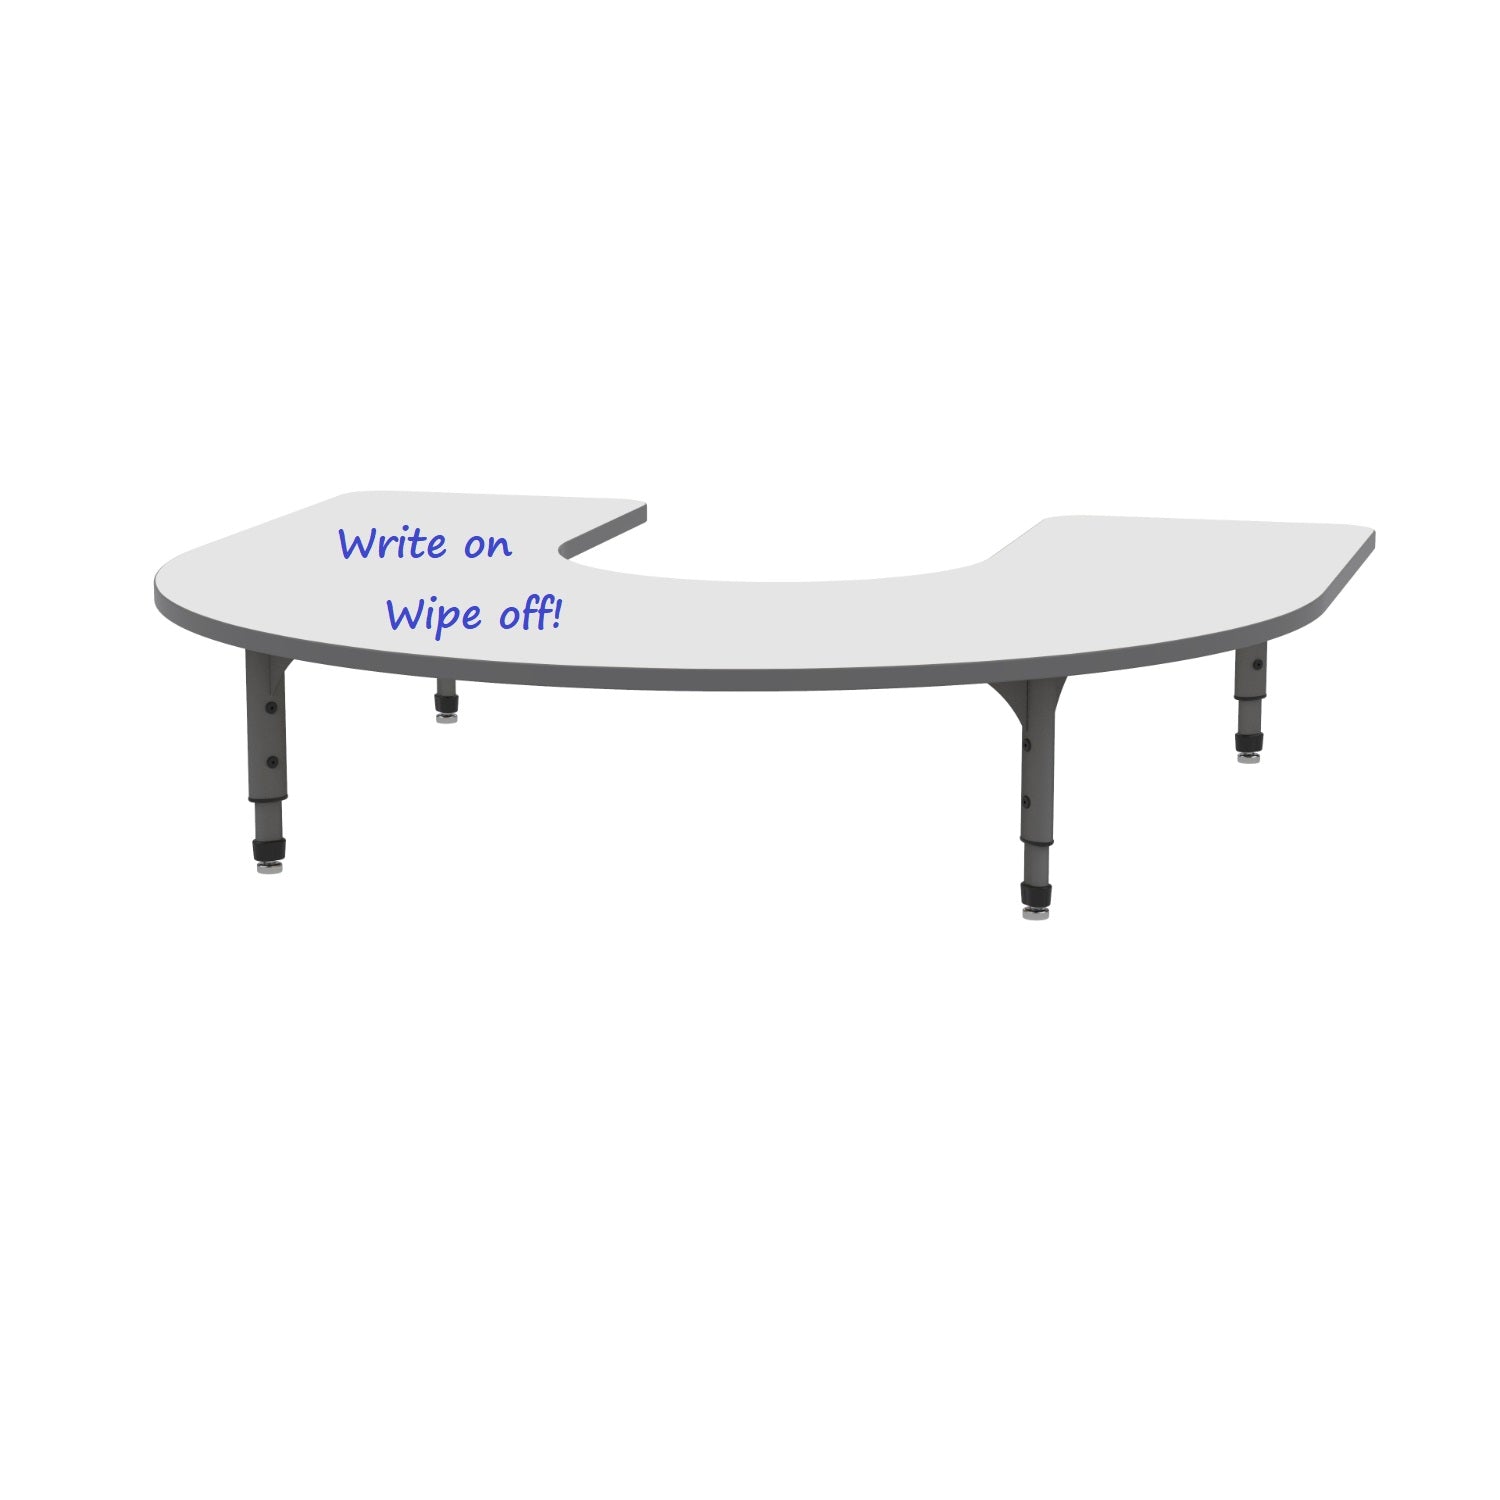 Adjustable Height Floor Activity Table with White Dry-Erase Markerboard Top, 60" x 66" Horseshoe